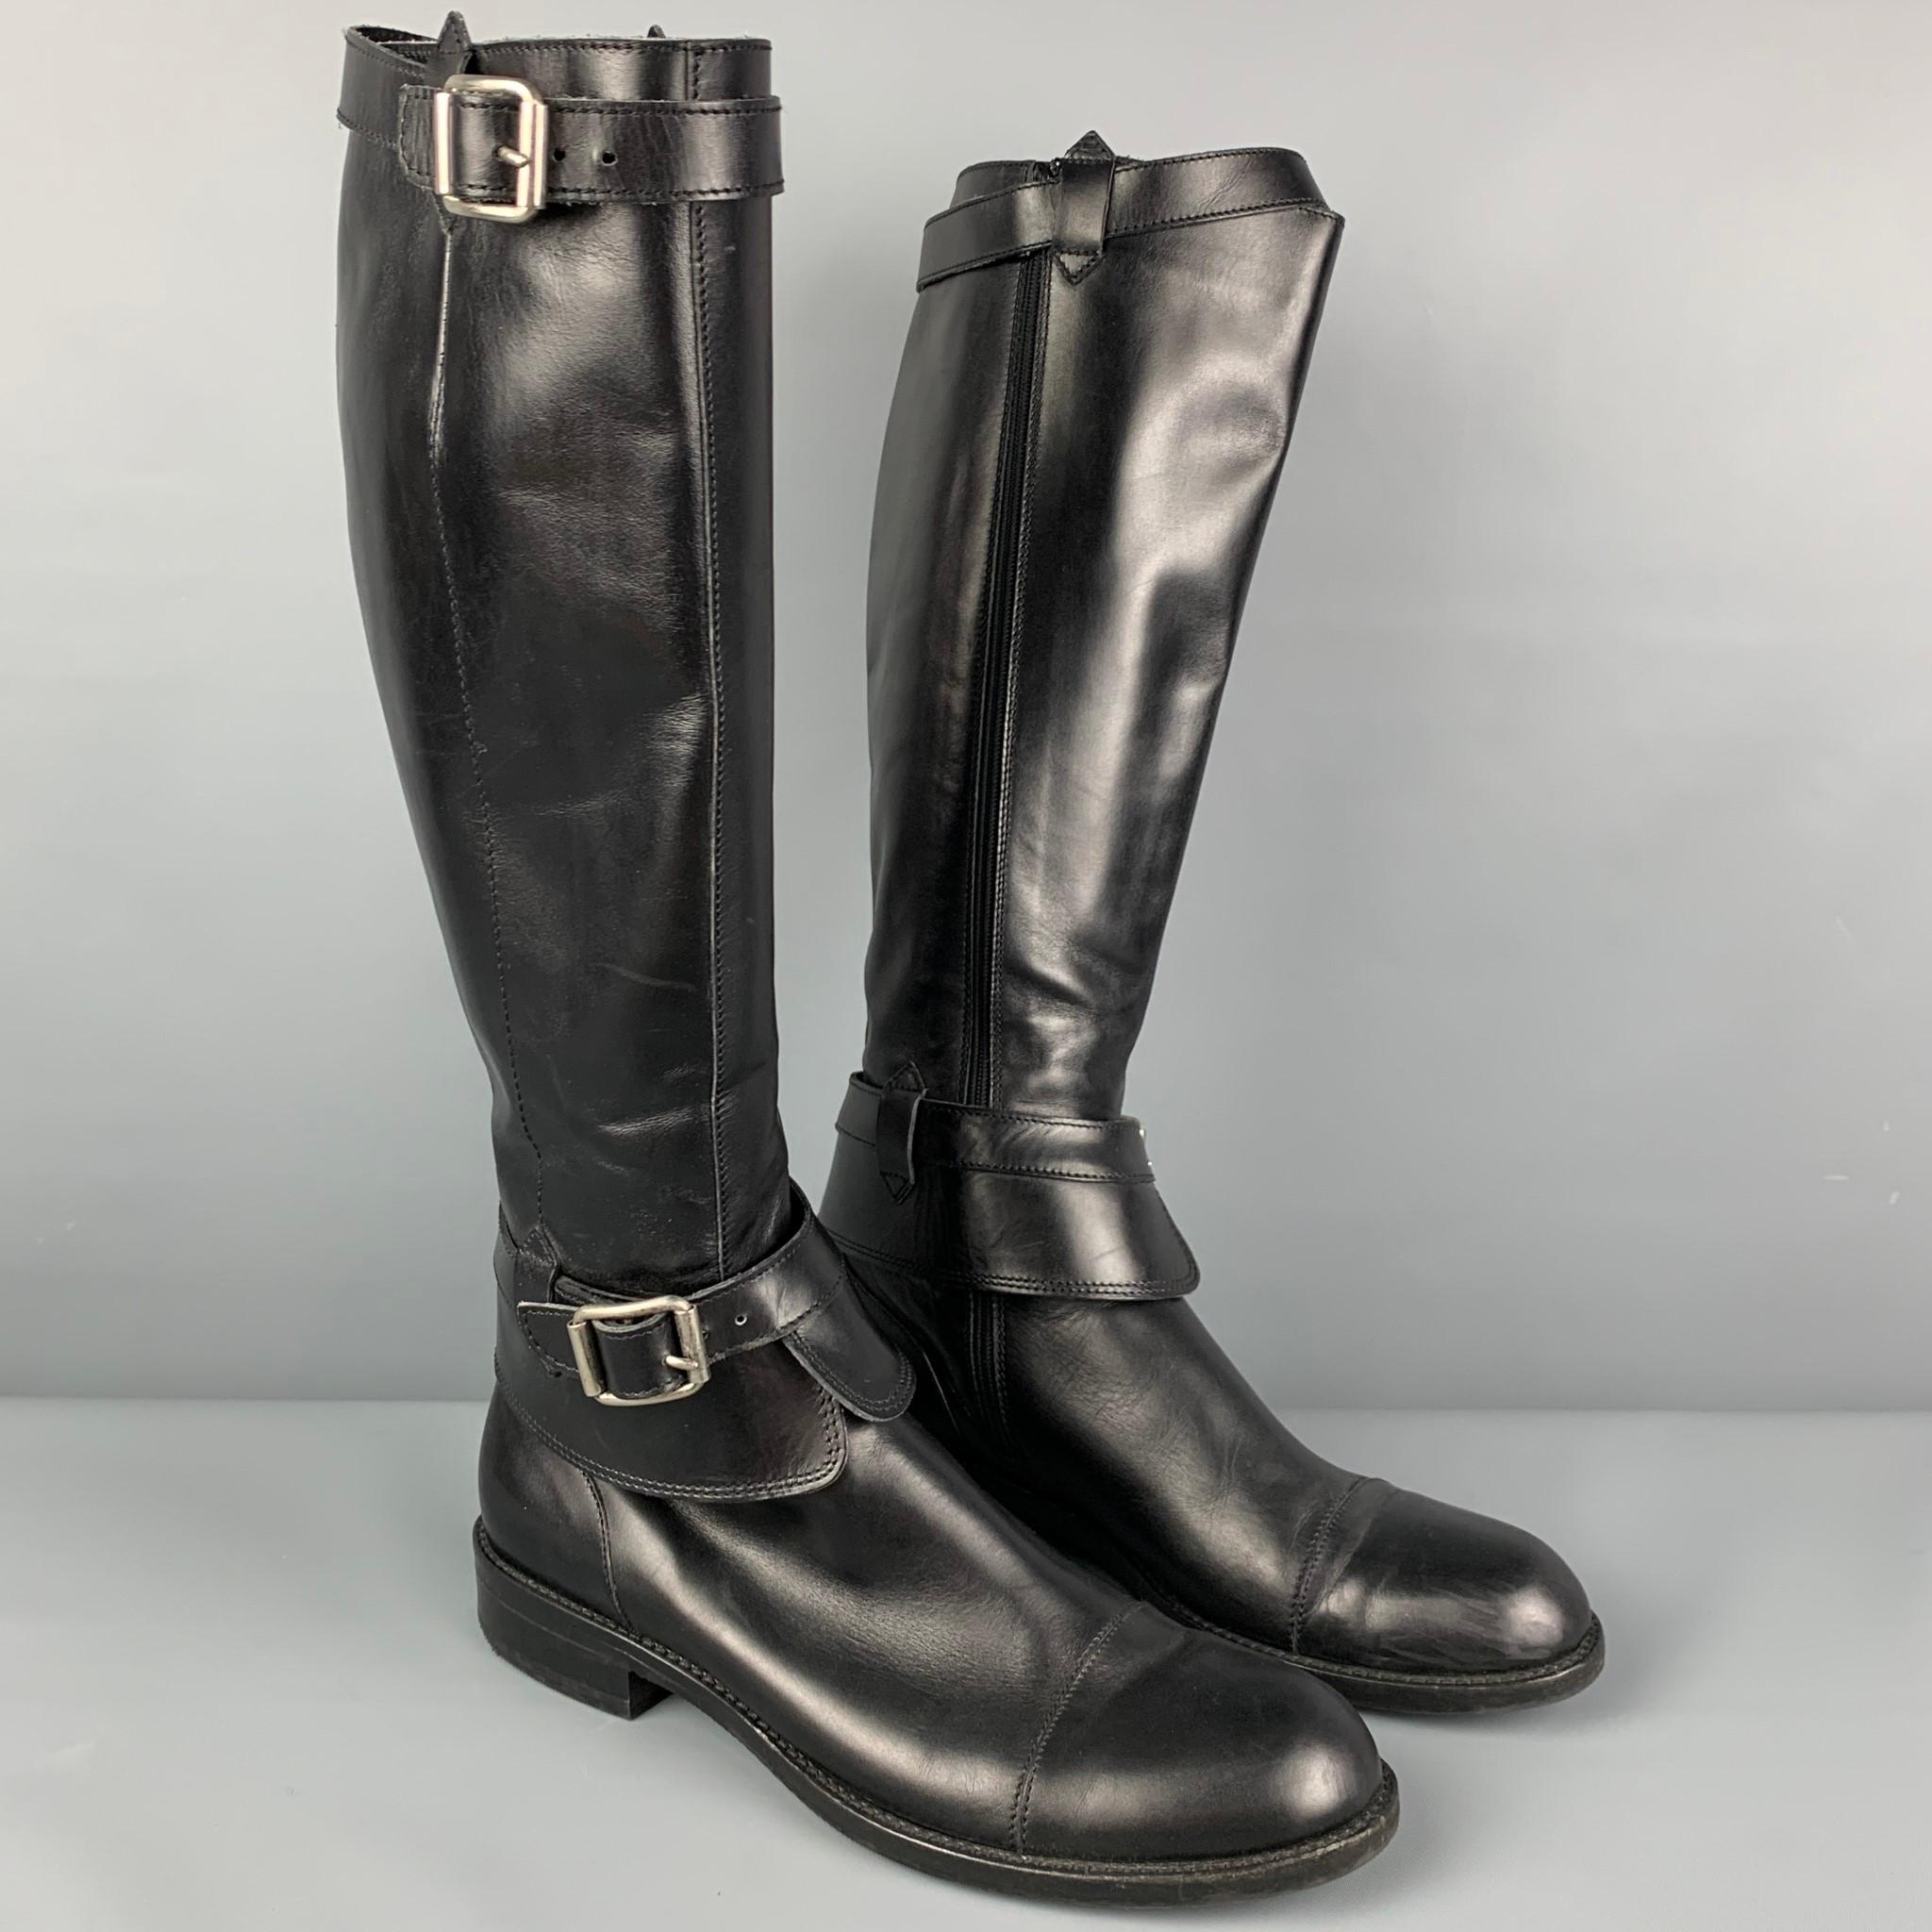 GIORGIO ARMANI boots comes in a black leather featuring a riding style, belt strap details, and a cap toe. Made in Italy. 

Very Good Pre-Owned Condition.
Marked: 39 XGB213

Measurements:

Length: 11 in.
Width: 4 in.
Height: 15.5 in. 